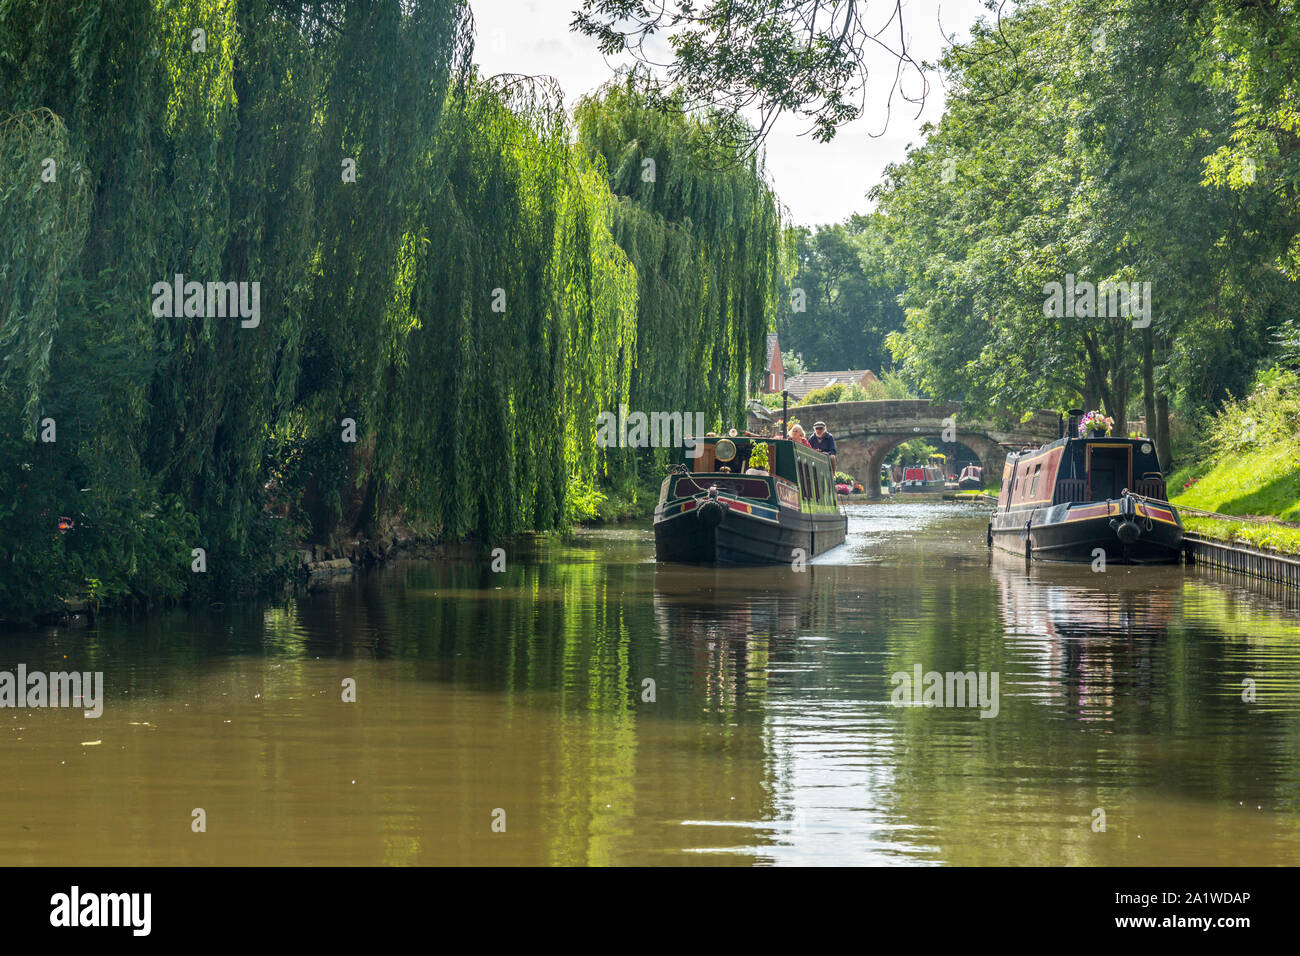 Narrow Boats, or Barges, on The Shropshire Union Canal in England. Stock Photo